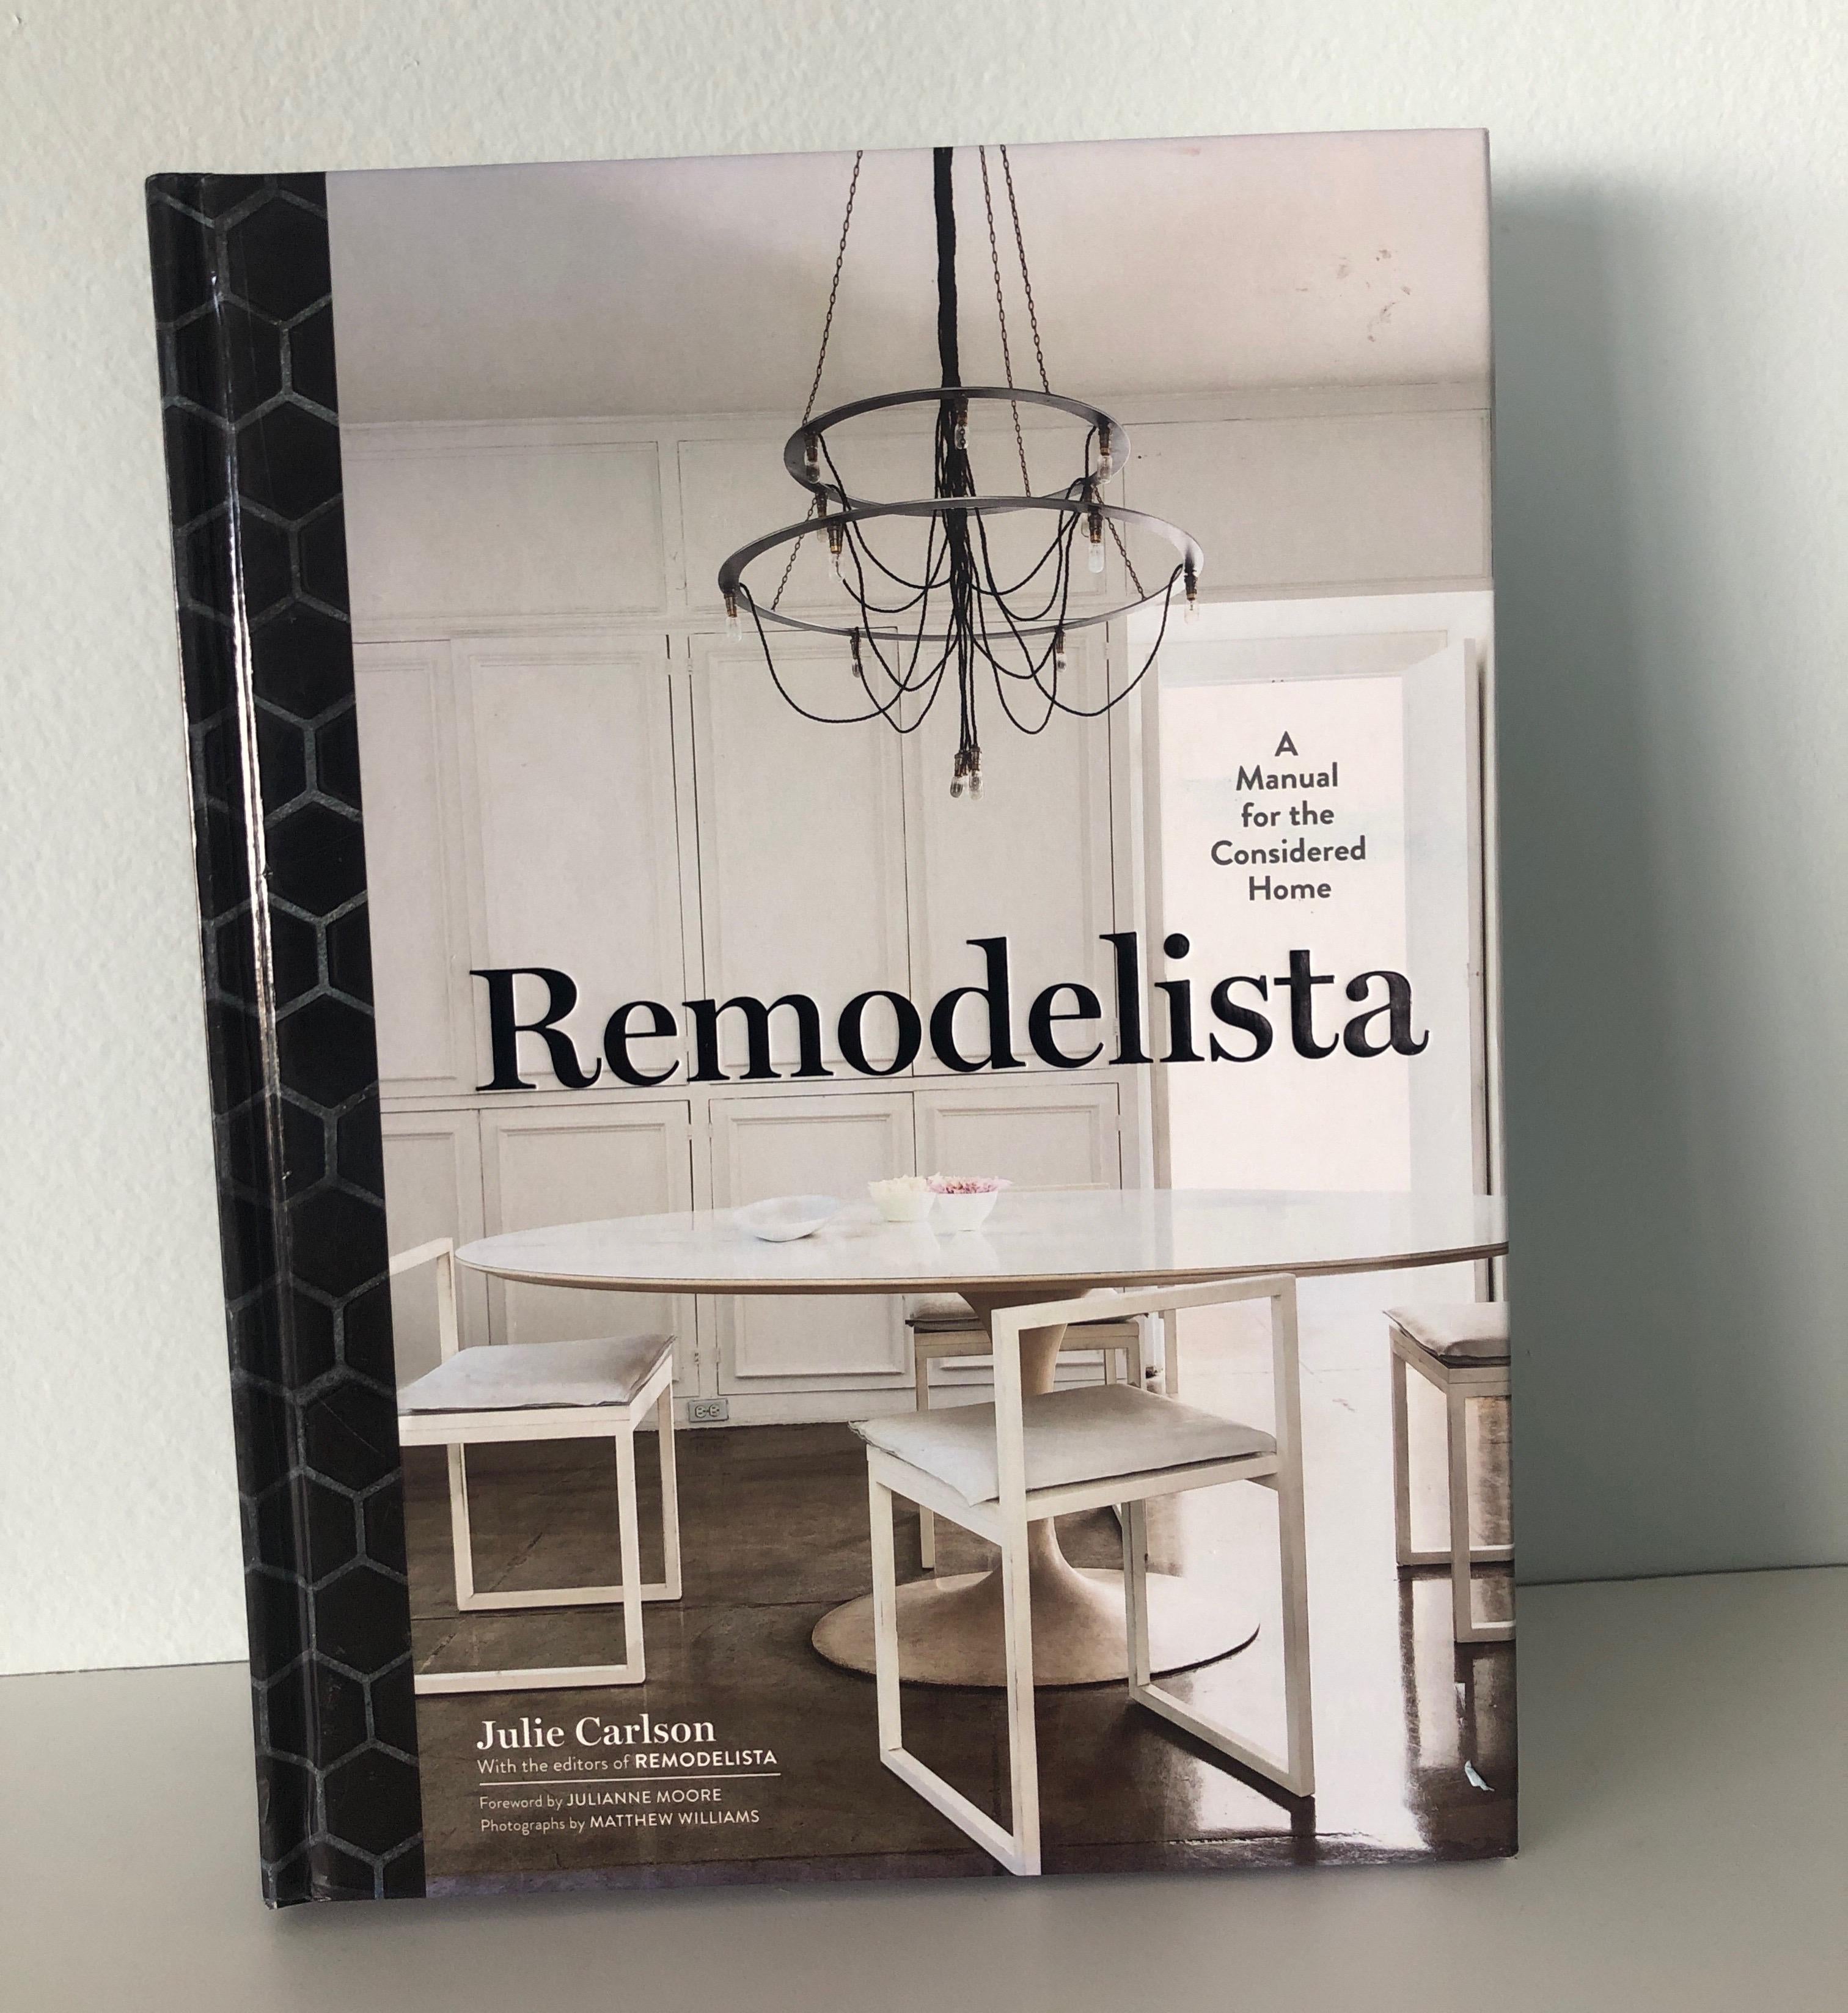 Remodelista hardcover – illustrated decorating book
Remodelista is the go-to undisputed authority for home design enthusiasts remodelers architects and designers Unlike sites that cater to all tastes Remodelista has a singular and clearly defined